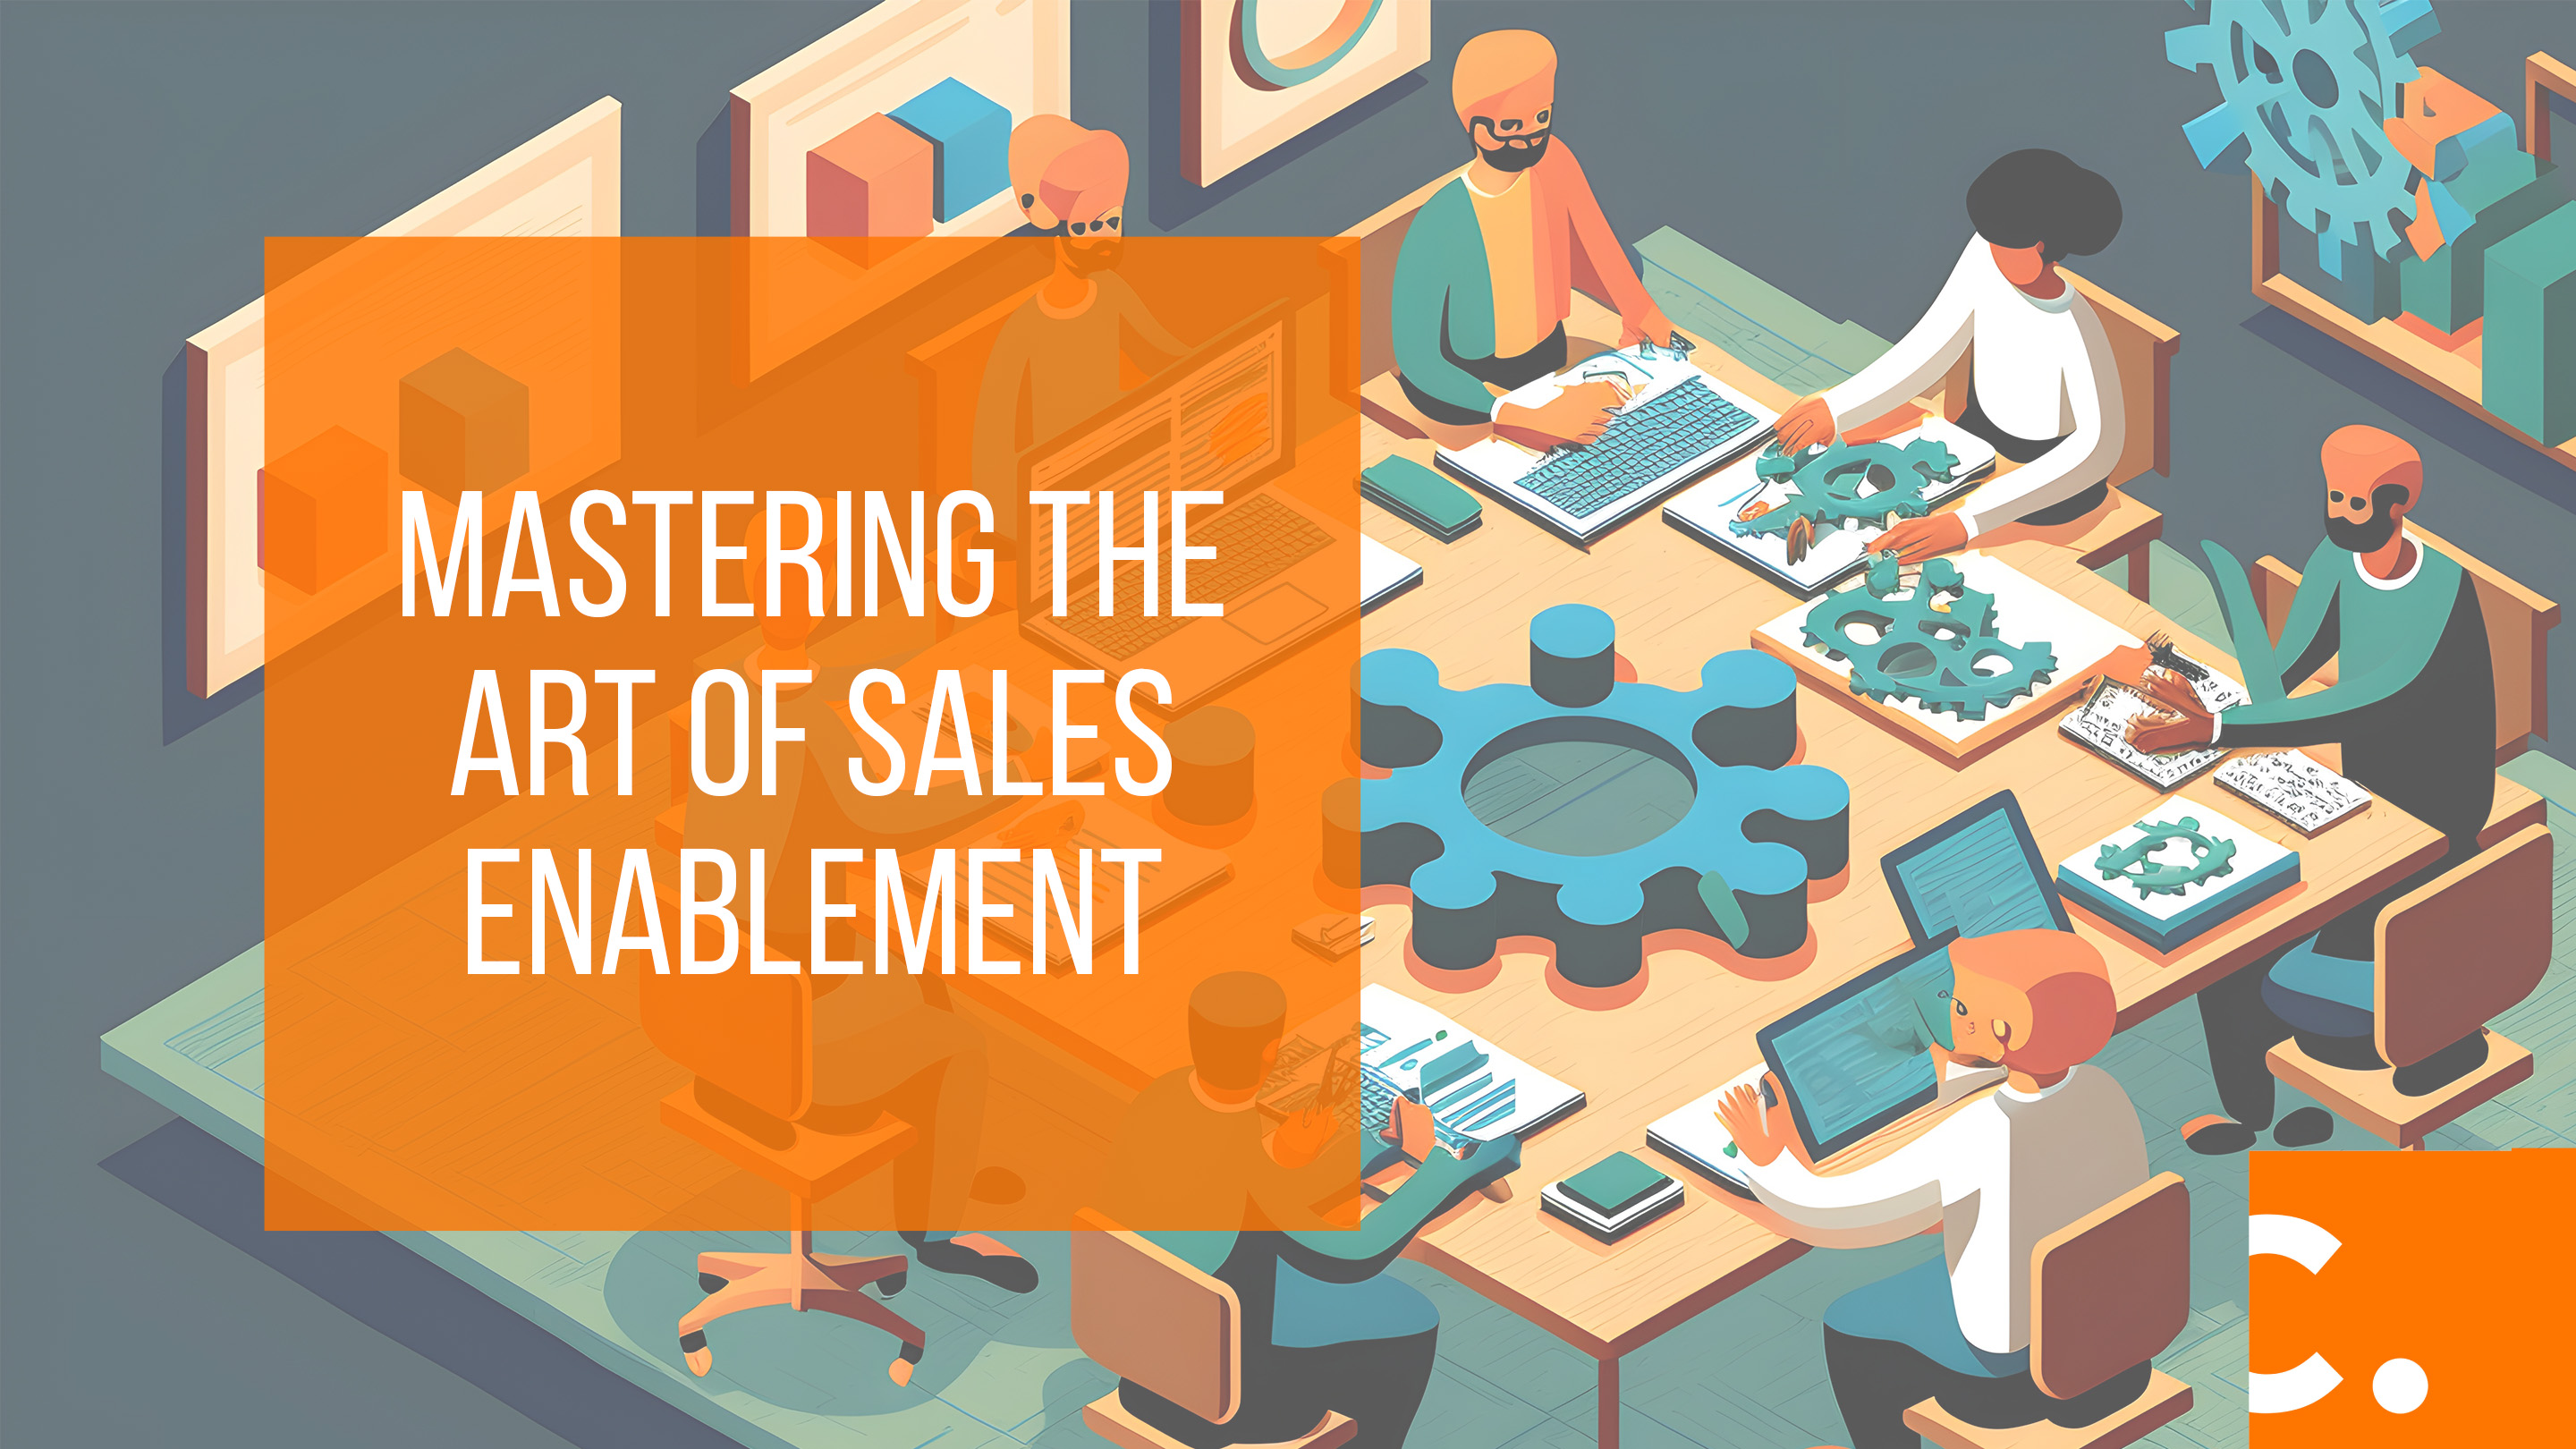 Mastering-the-Art-of-Sales-Enablement-Featured-Image